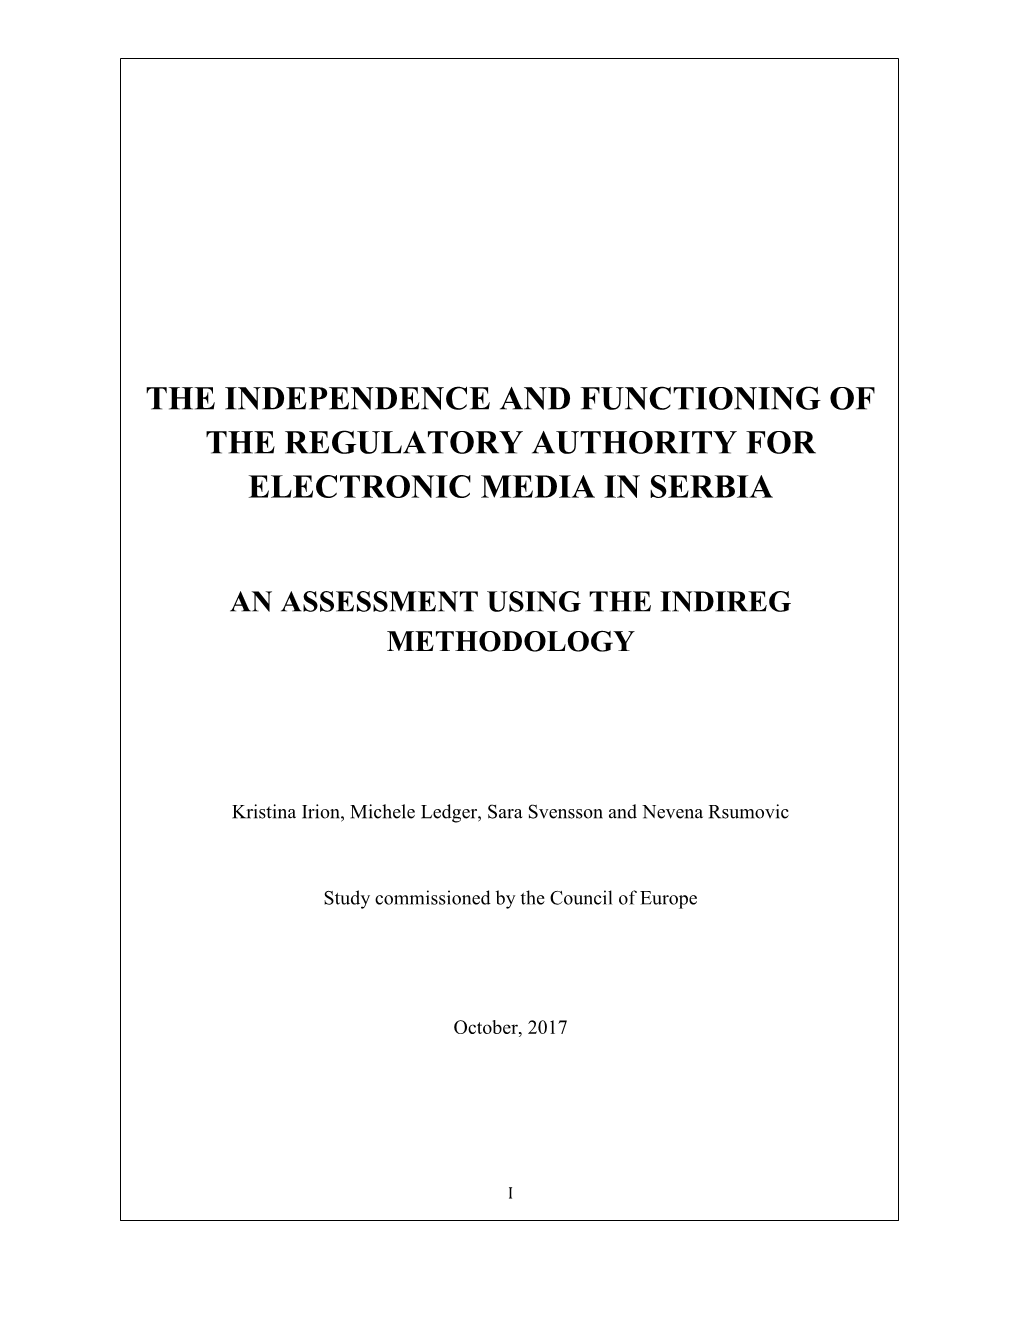 The Independence and Functioning of the Regulatory Authority for Electronic Media in Serbia